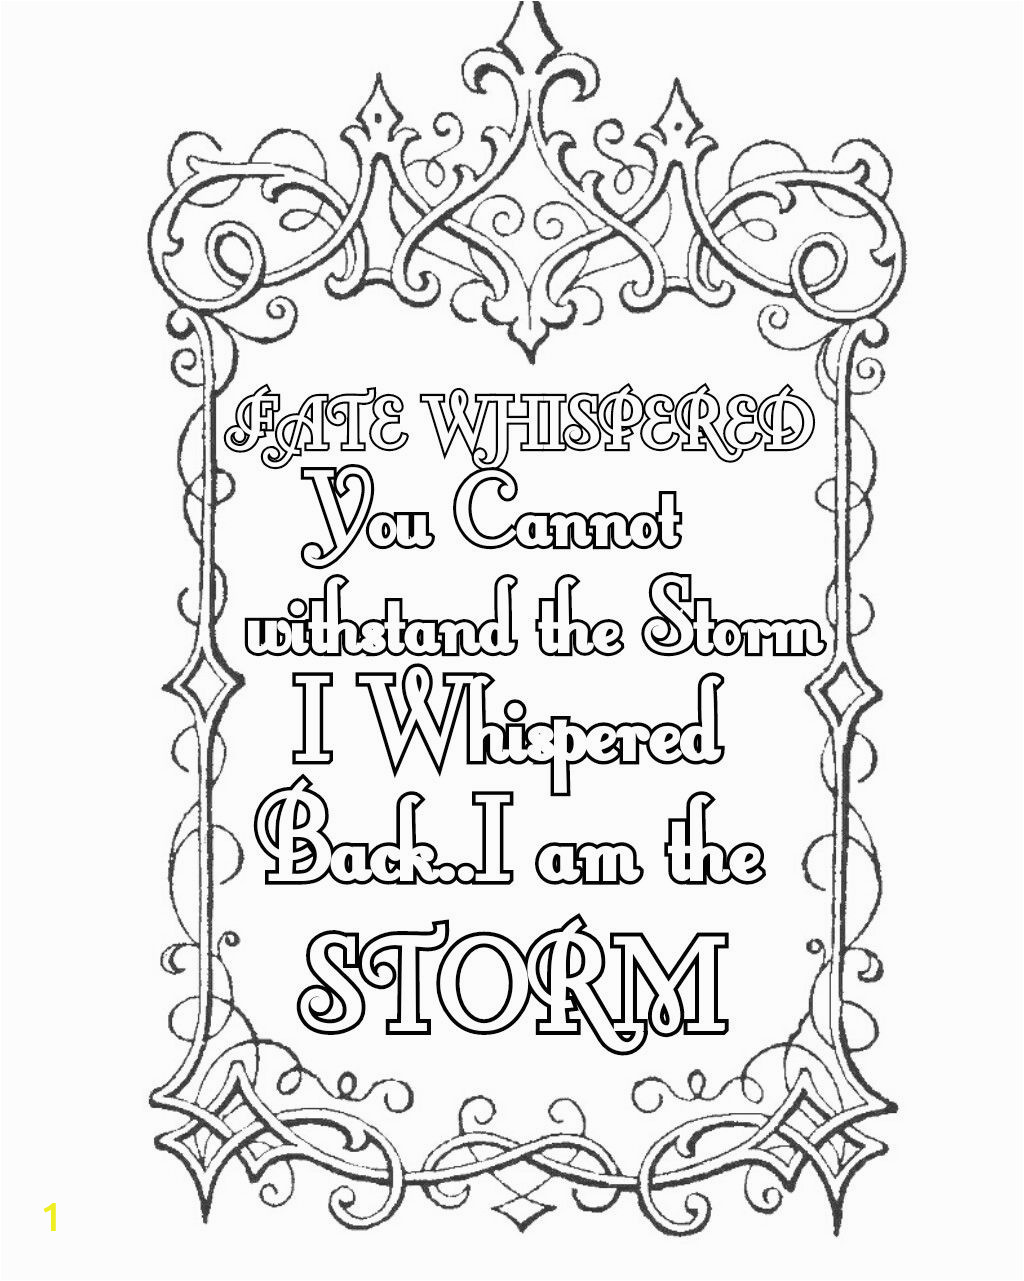 Free Printable Quote Coloring Pages for Adults Pin by Tianna norris On Adult Coloring